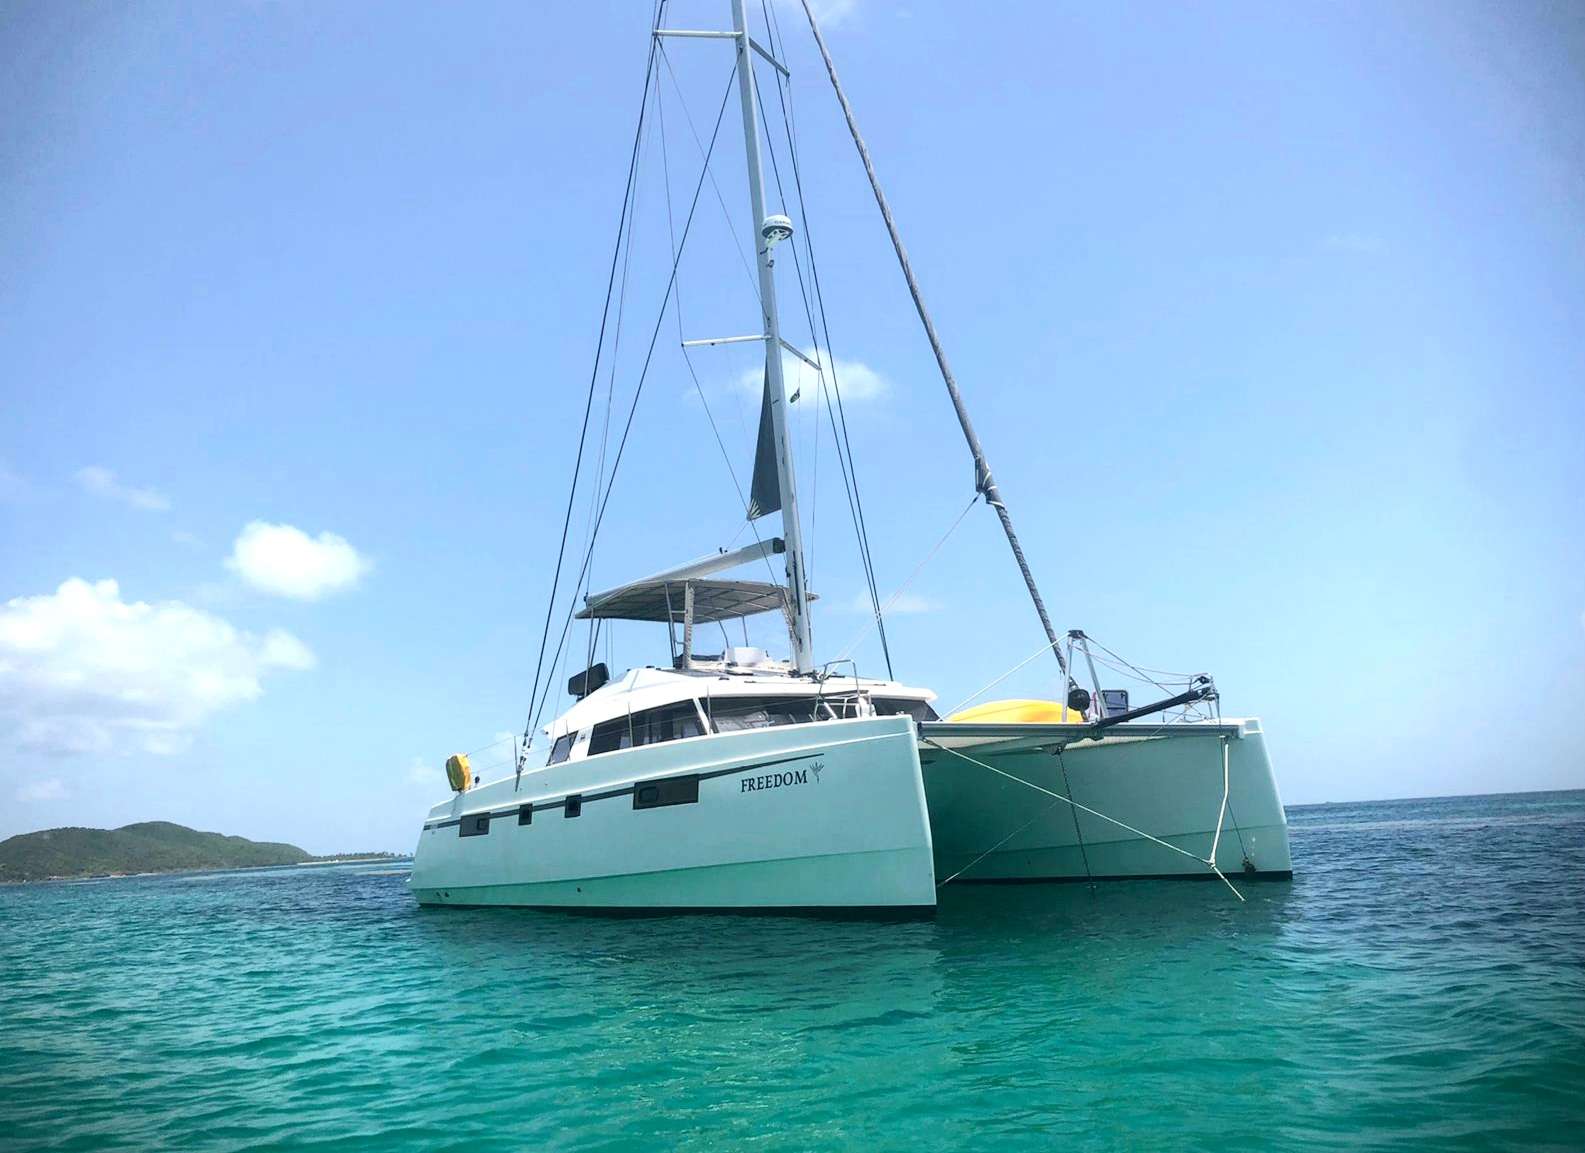 Freedom - Luxury yacht charter Antigua and Barbuda & Boat hire in Caribbean 1